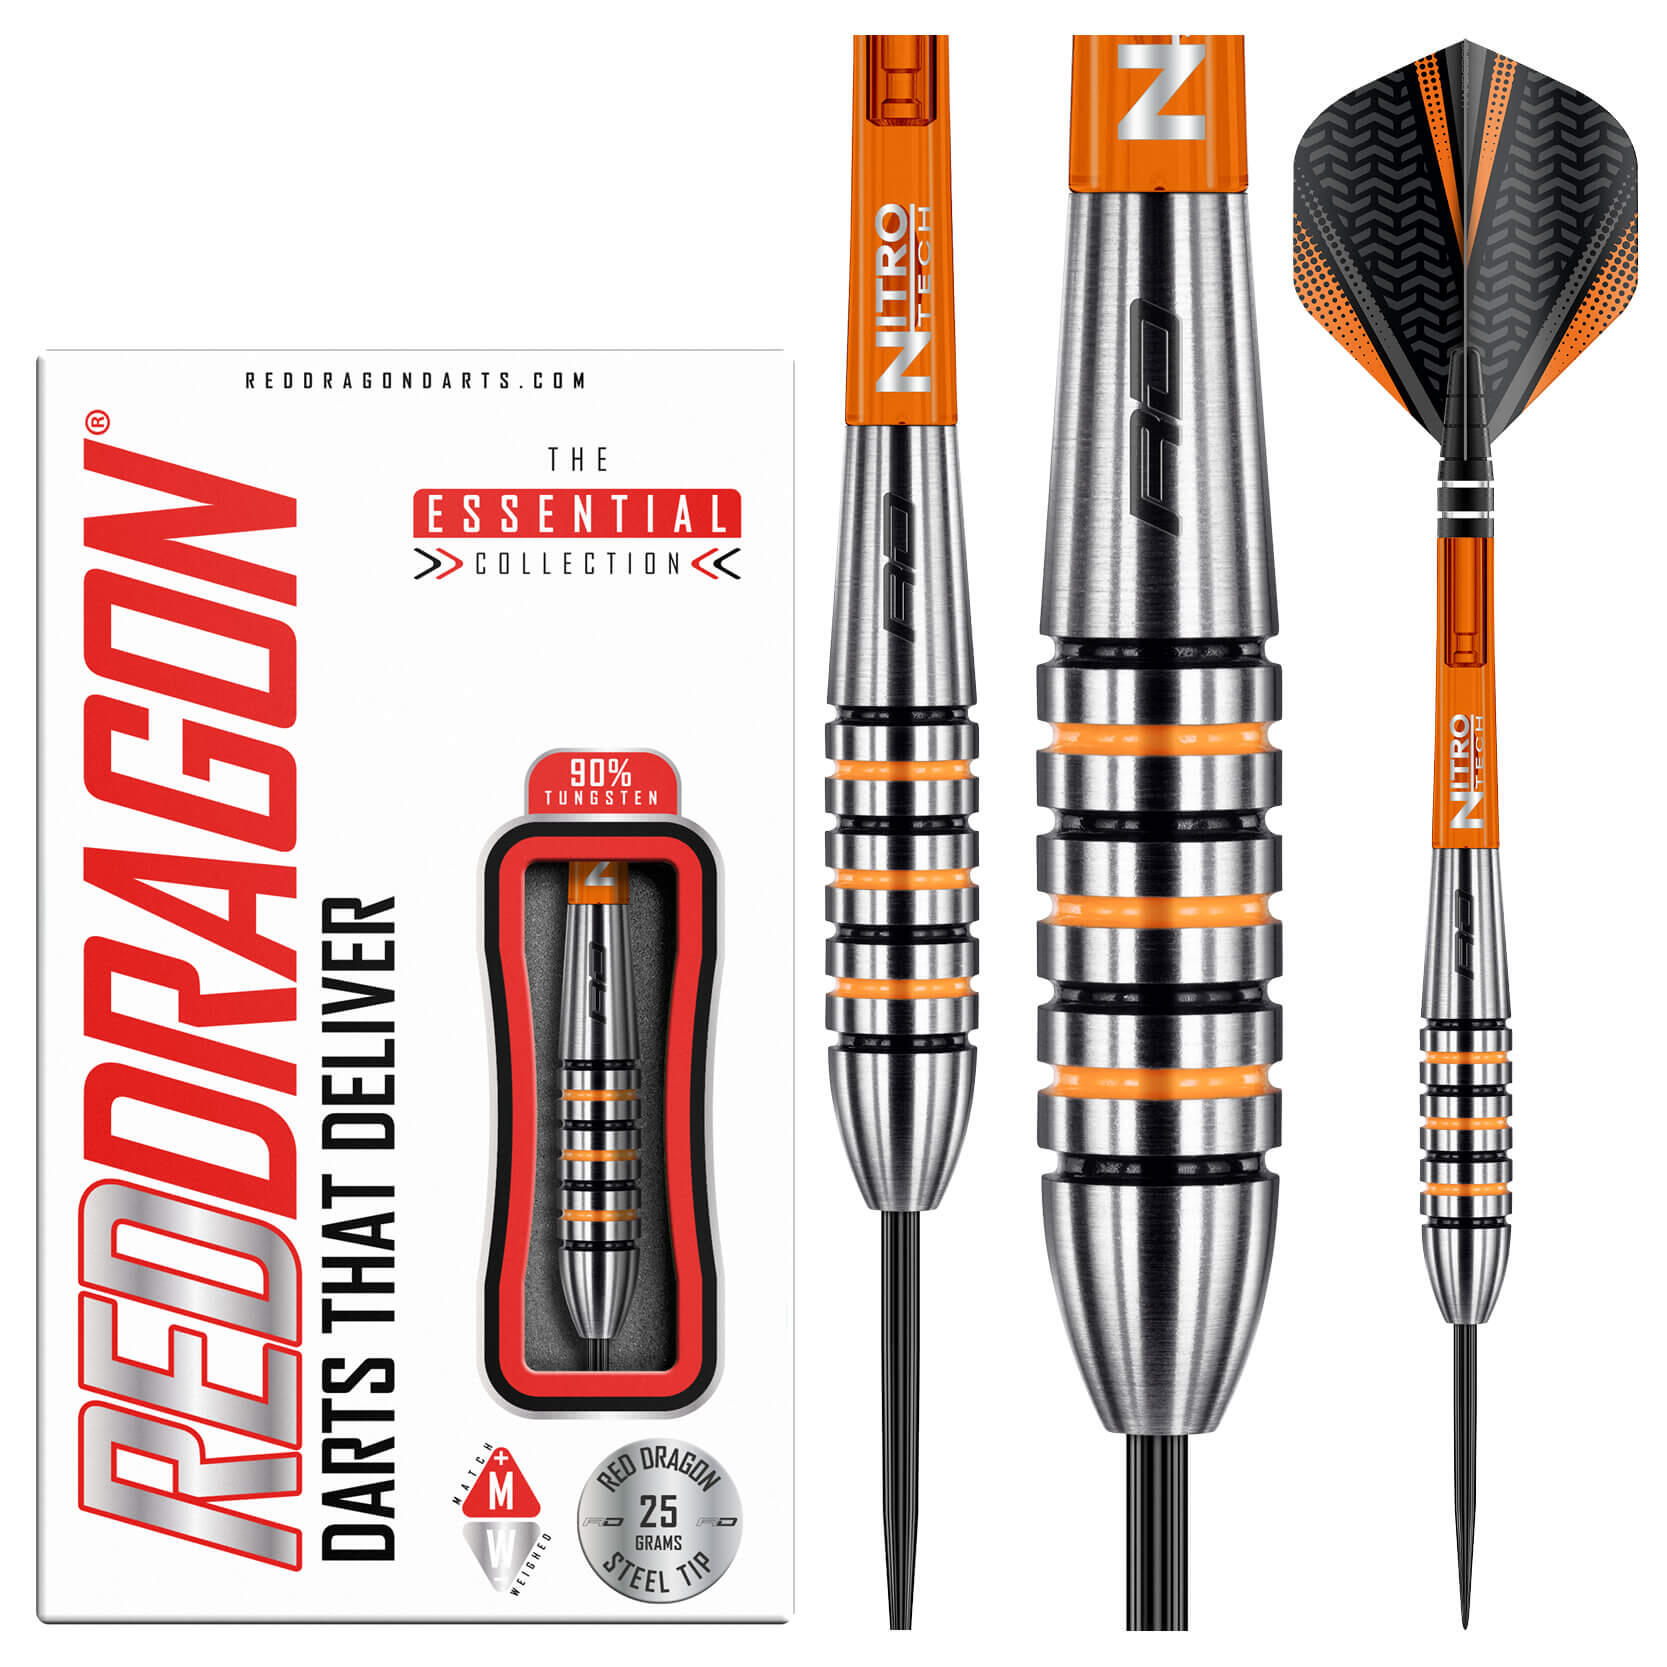 RED DRAGON DARTS Amberjack 15: 25g Tungsten Darts Set with Flights and Stems